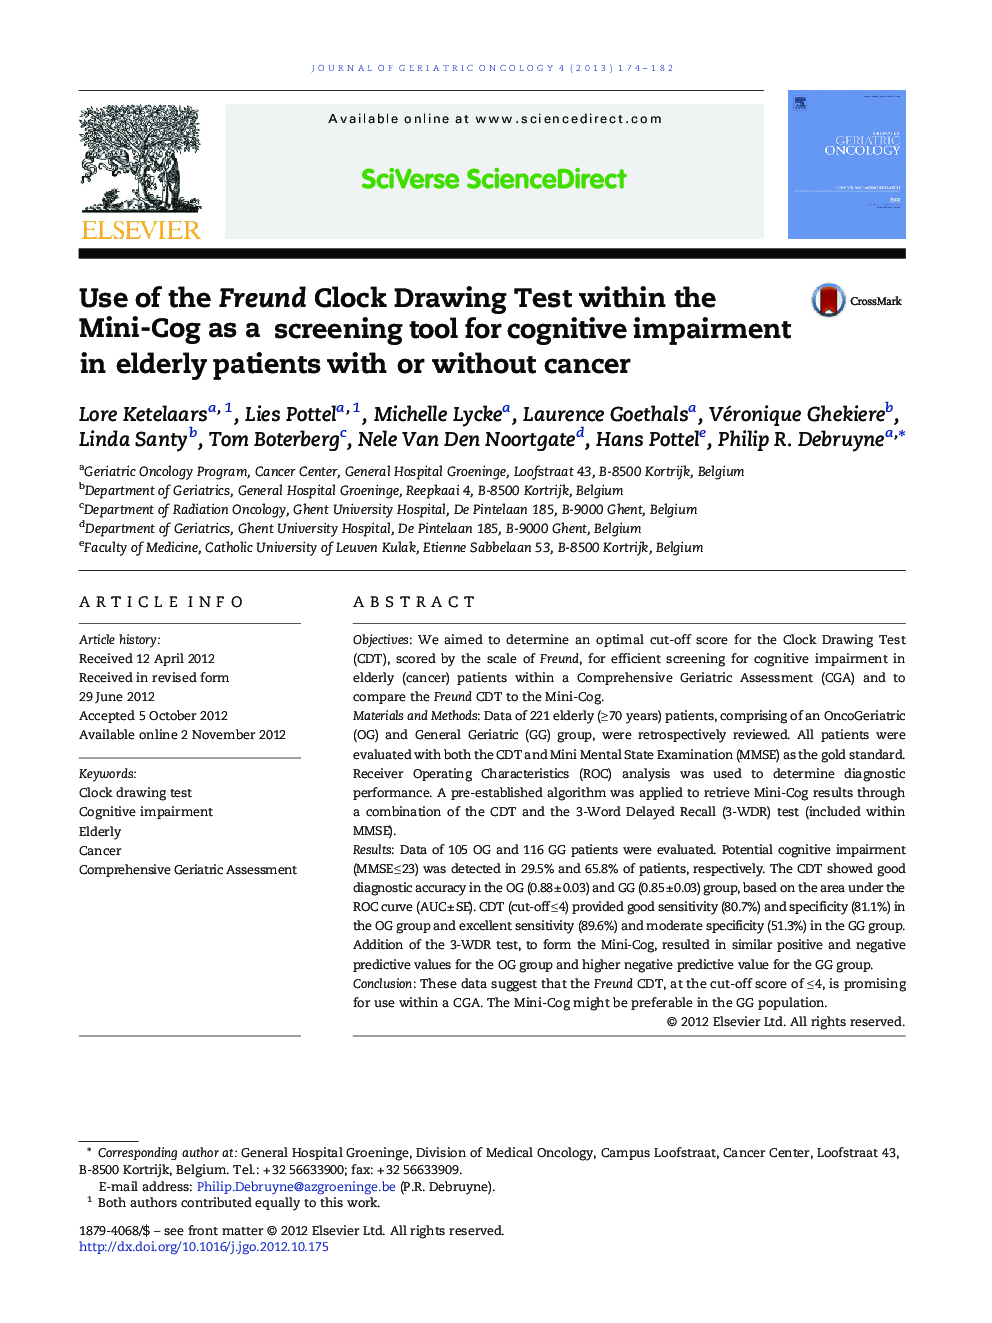 Use of the Freund Clock Drawing Test within the Mini-Cog as a screening tool for cognitive impairment in elderly patients with or without cancer